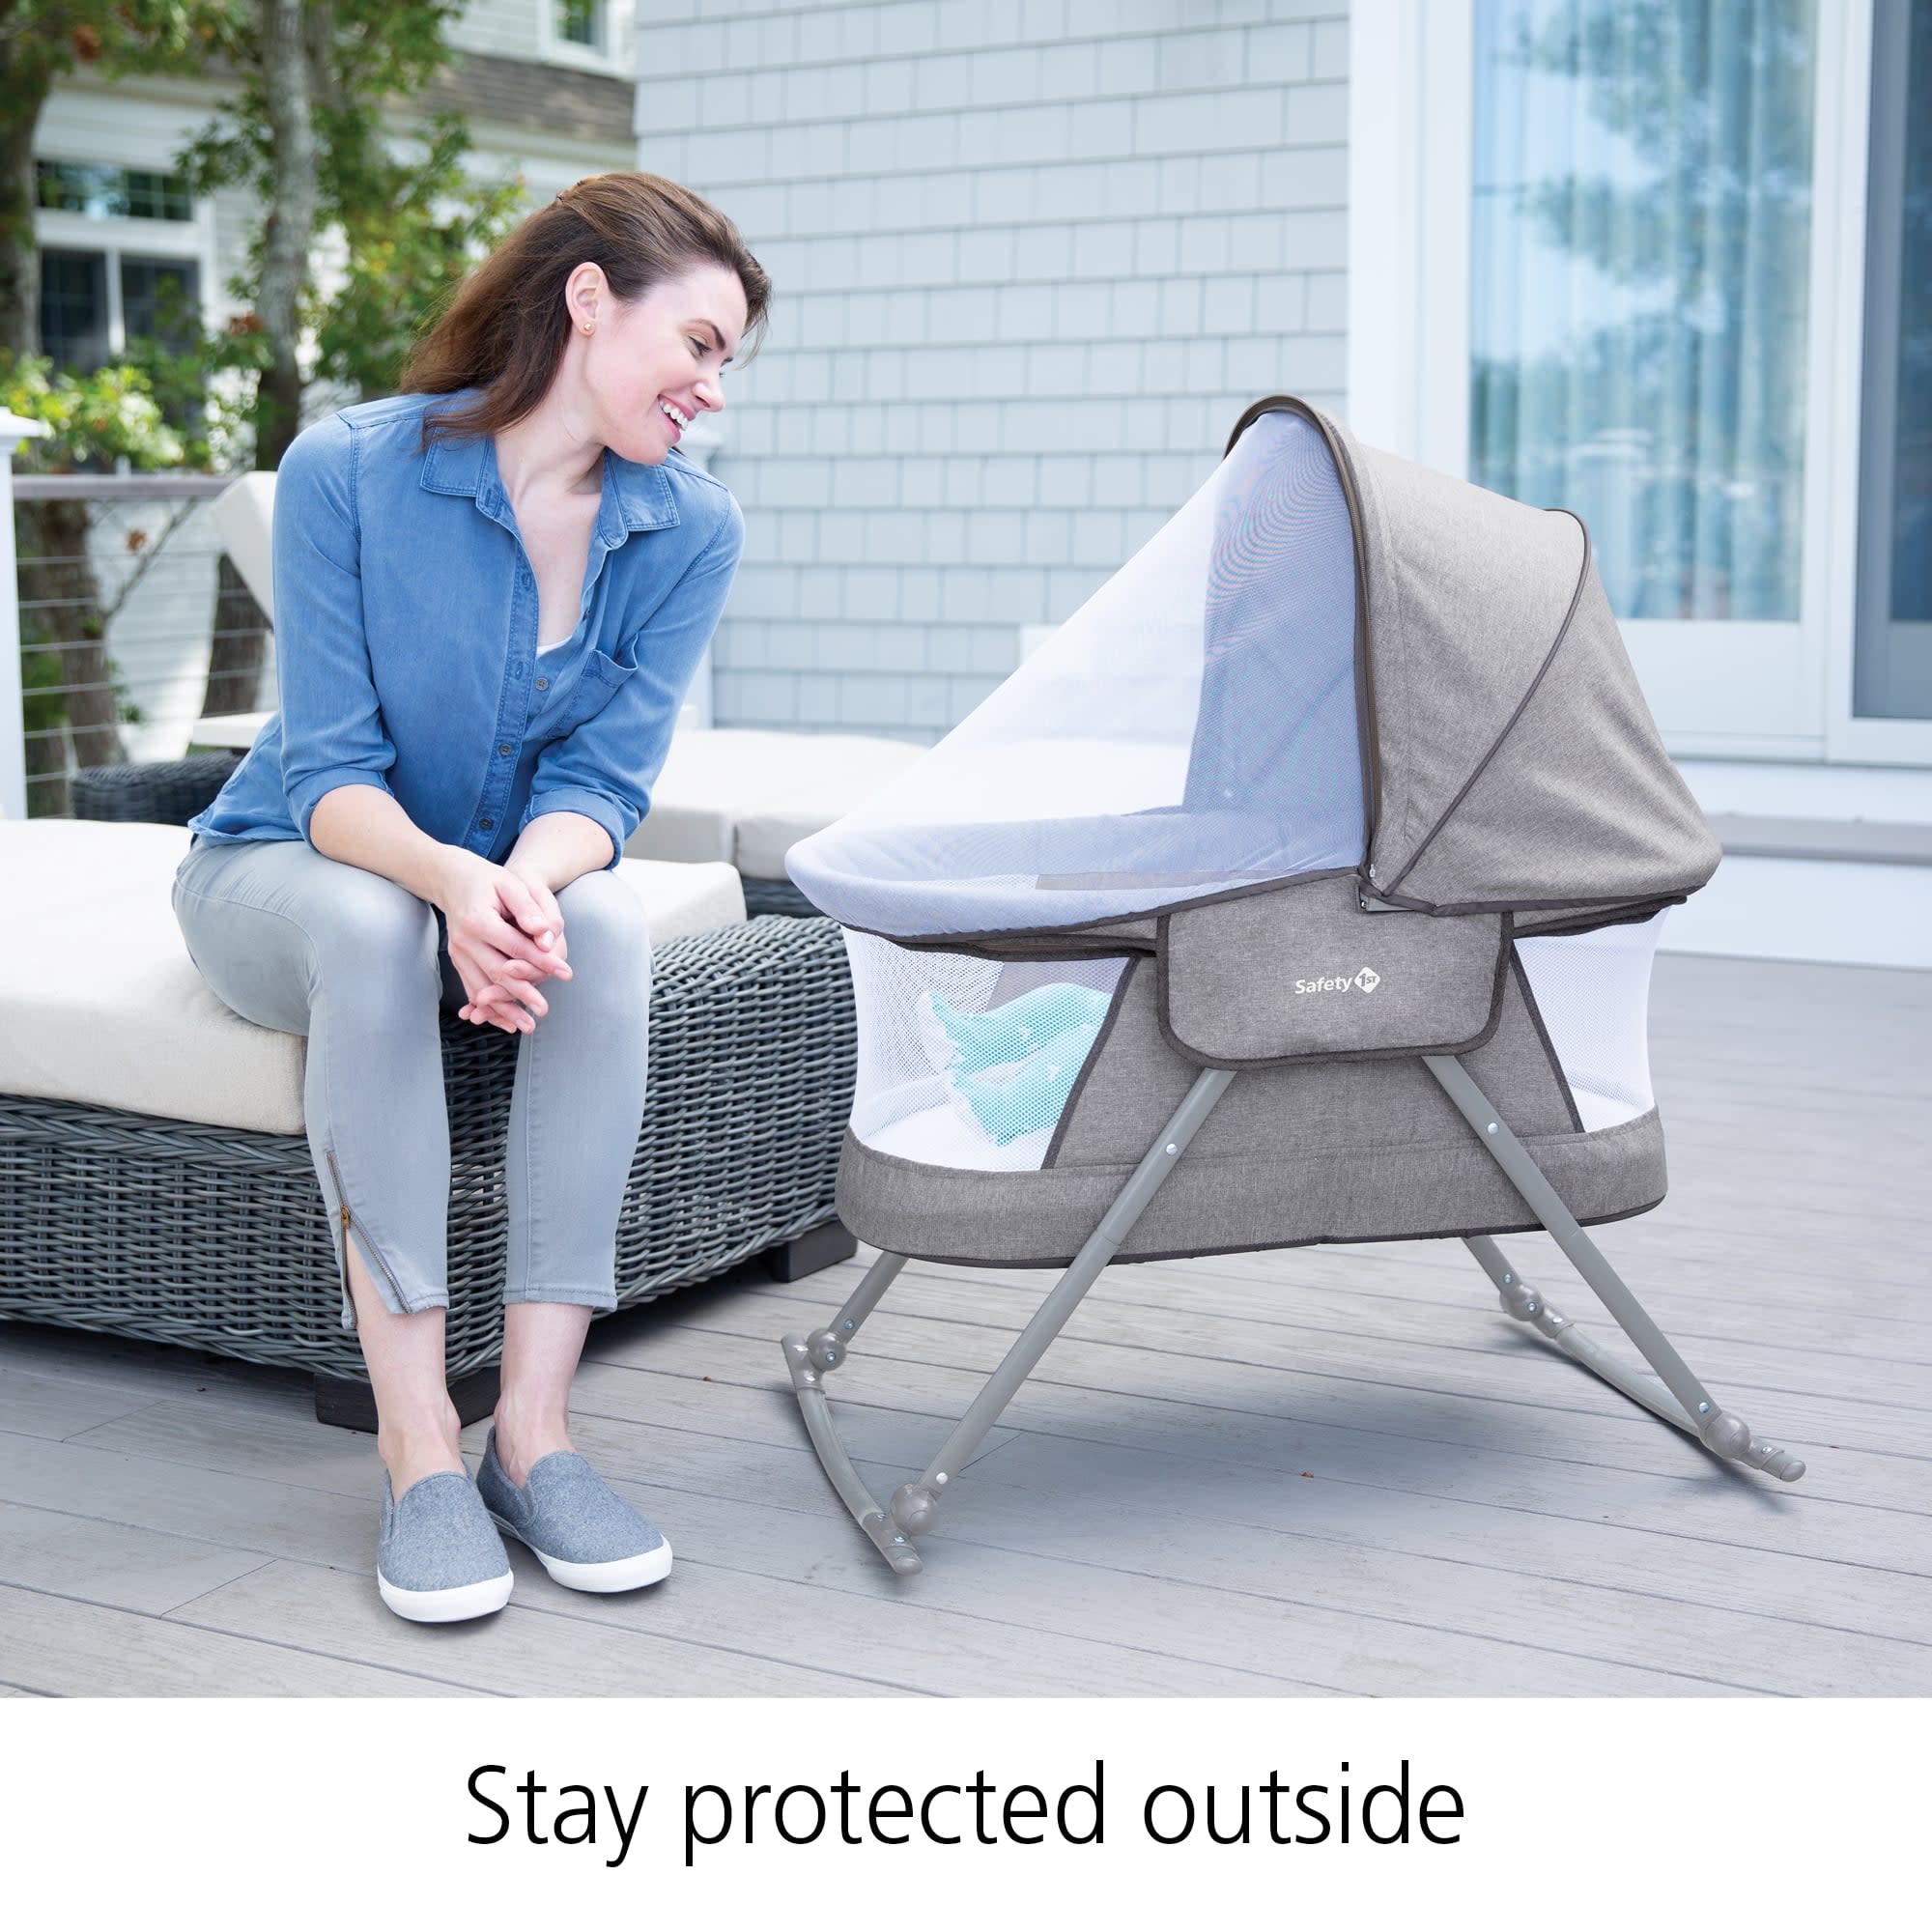 Parent on a back porch showing how the bug screen helps her baby stay protected outside